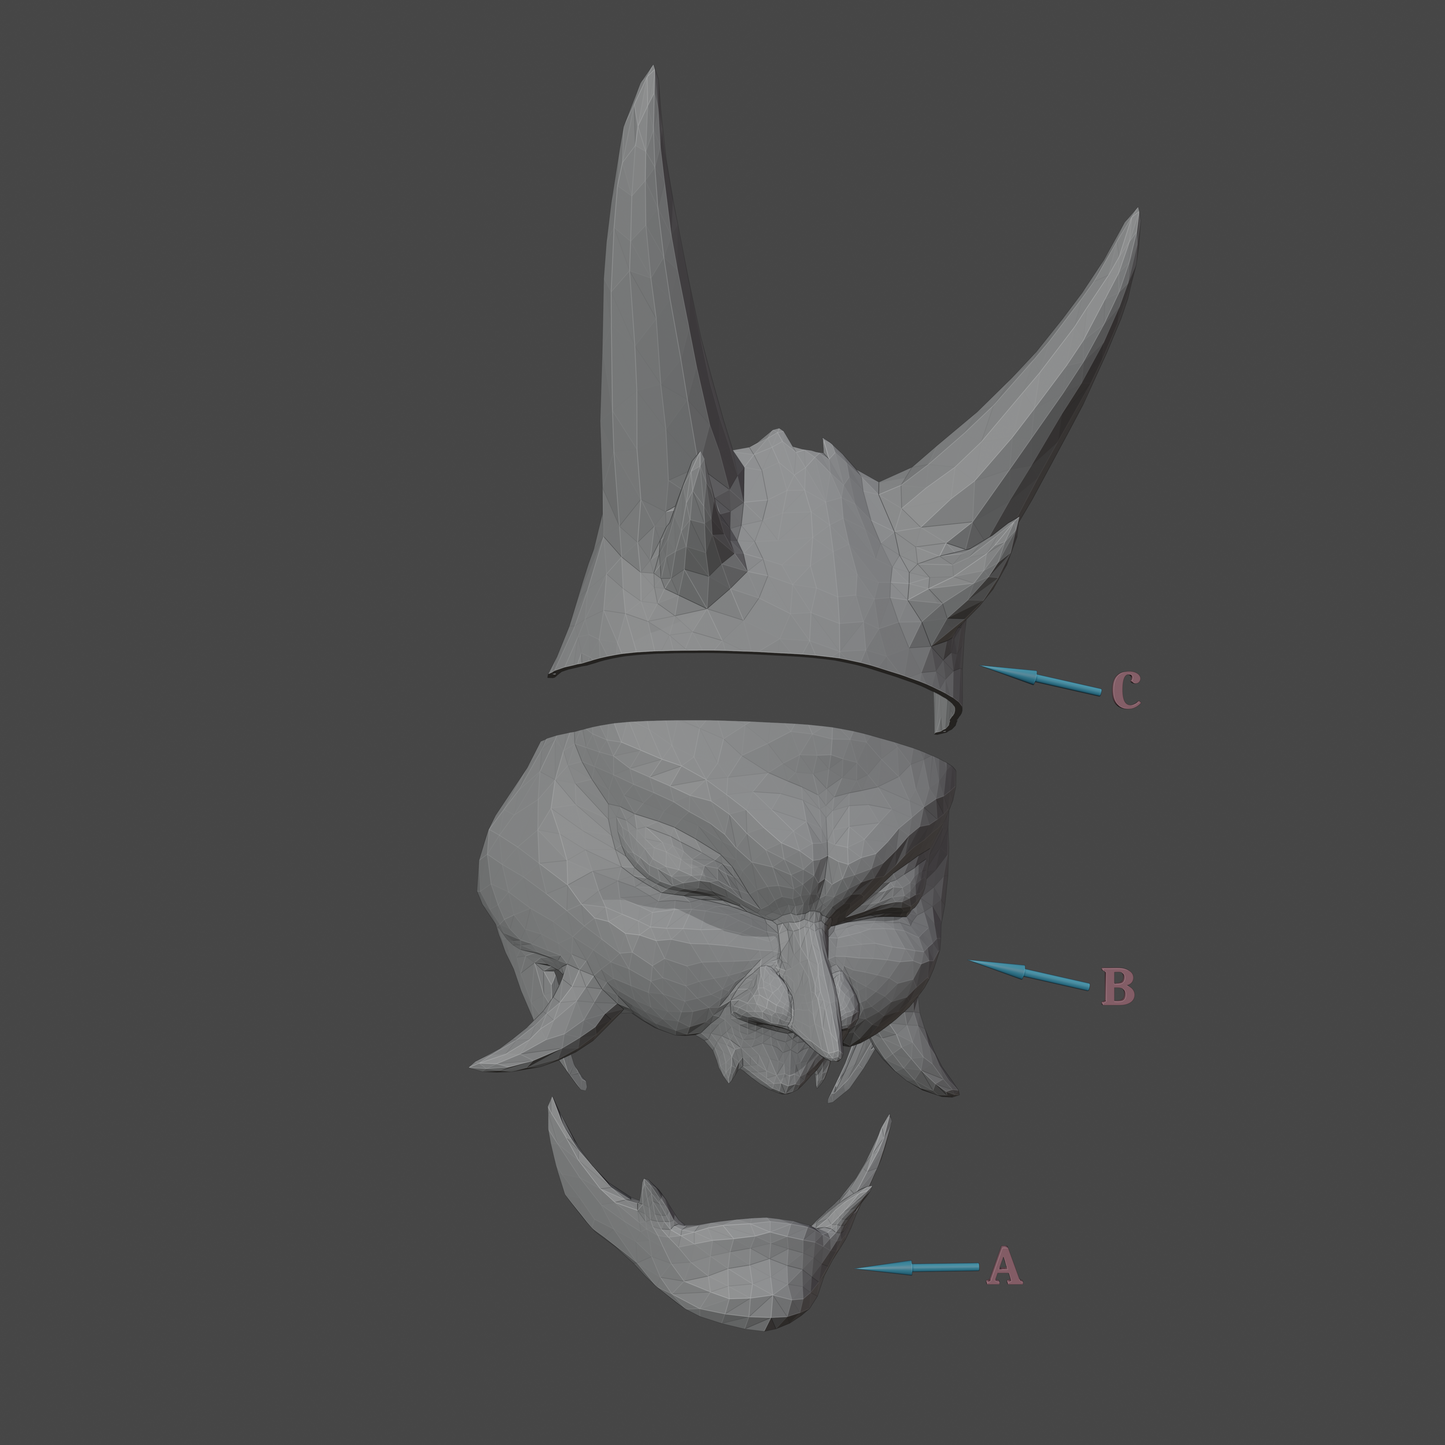 Xiao Demon Mask - Digital 3D Model Files and Physical 3D Printed Kit Options - Xiao Cosplay - Xiao Mask